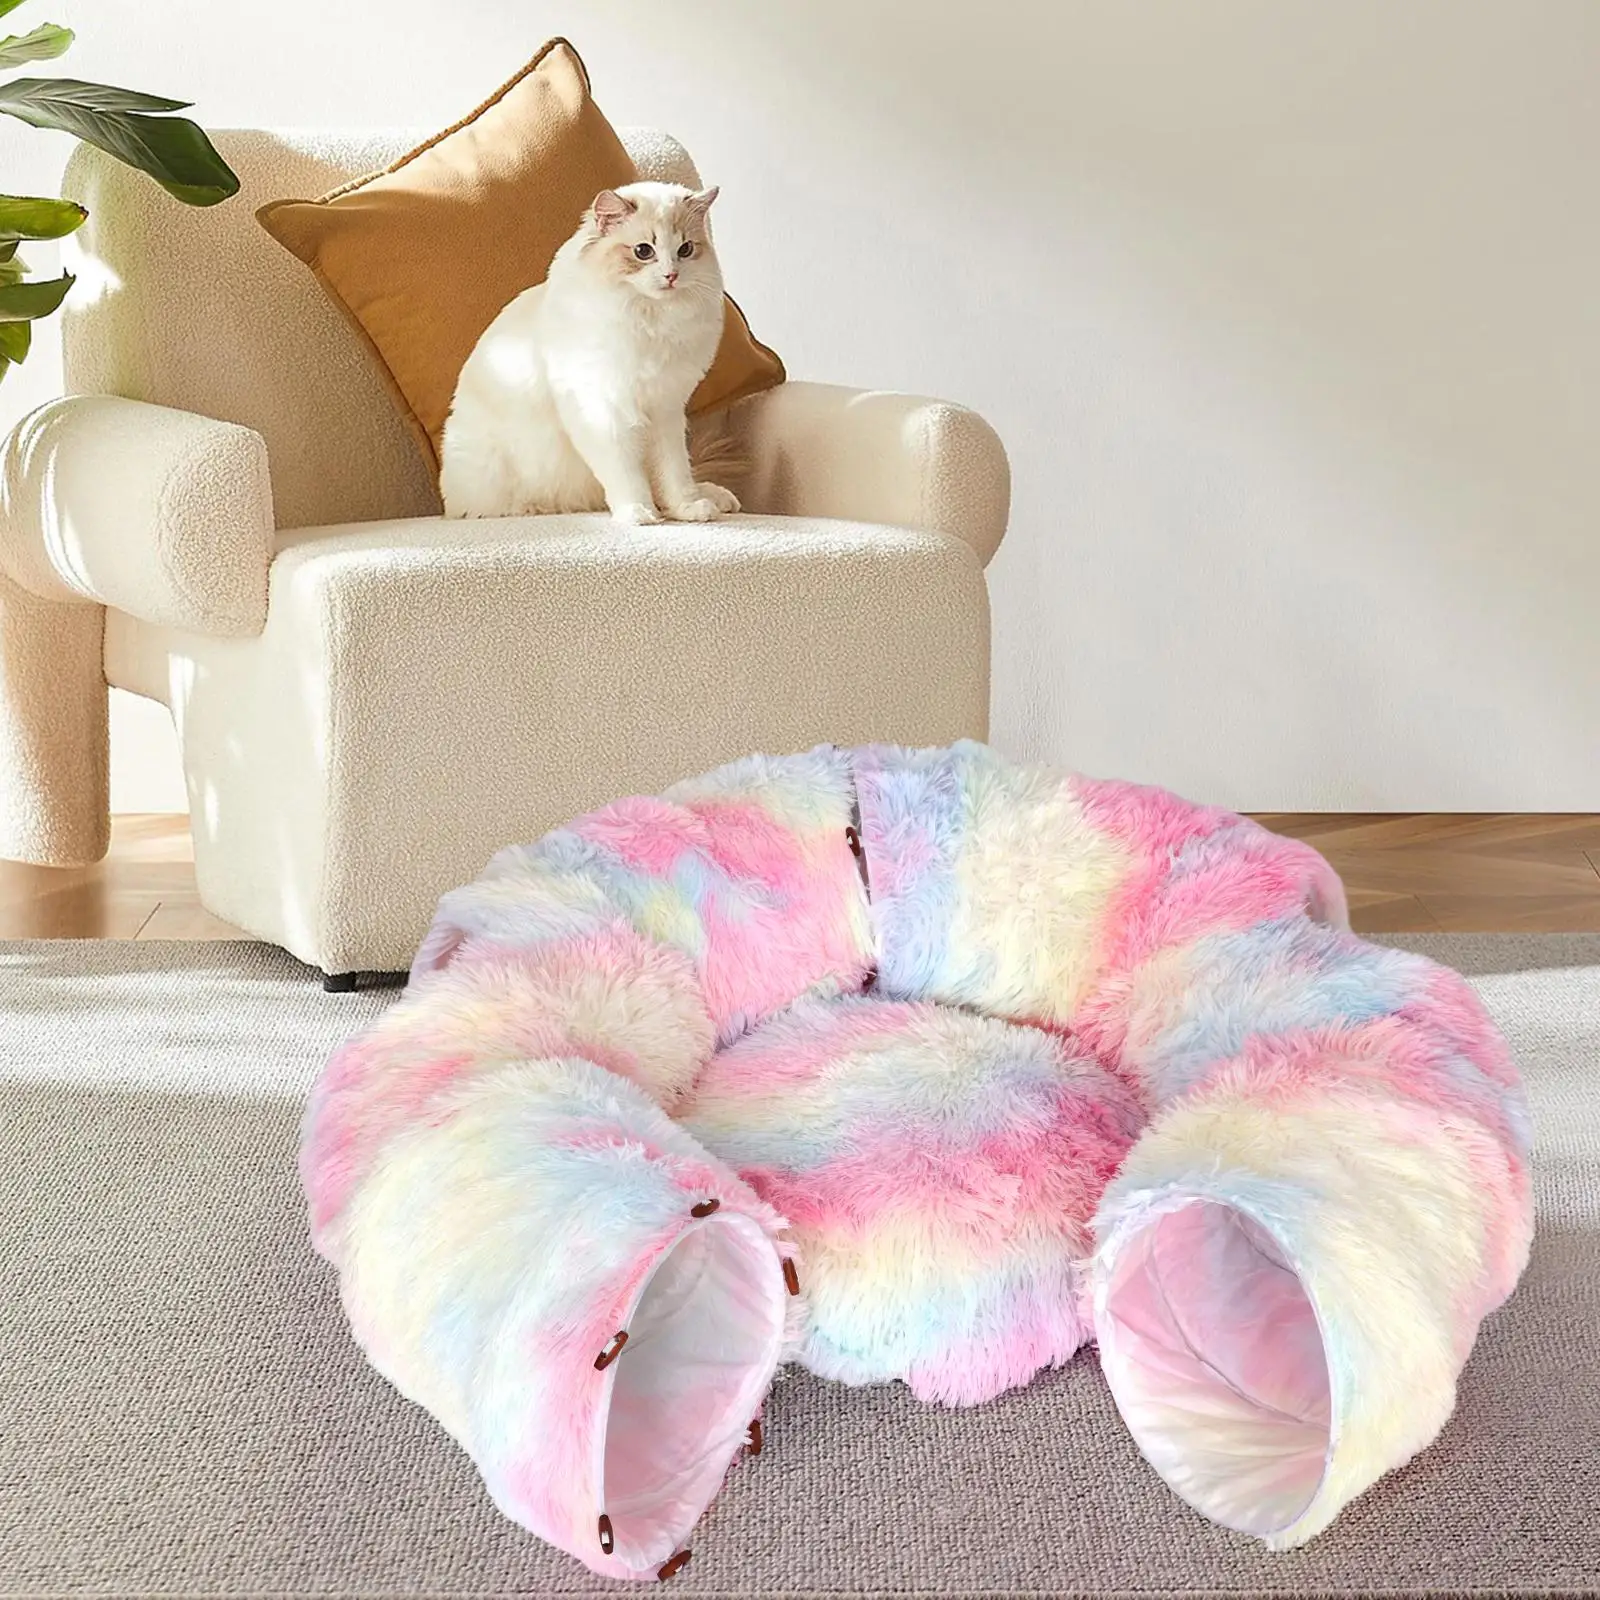 Cat Tunnel Cat Toy Collapsible Portable with Hanging Ball Warm Soft Pet Cat Bed for Rabbit Bunny Kitten Small Animals Ferret